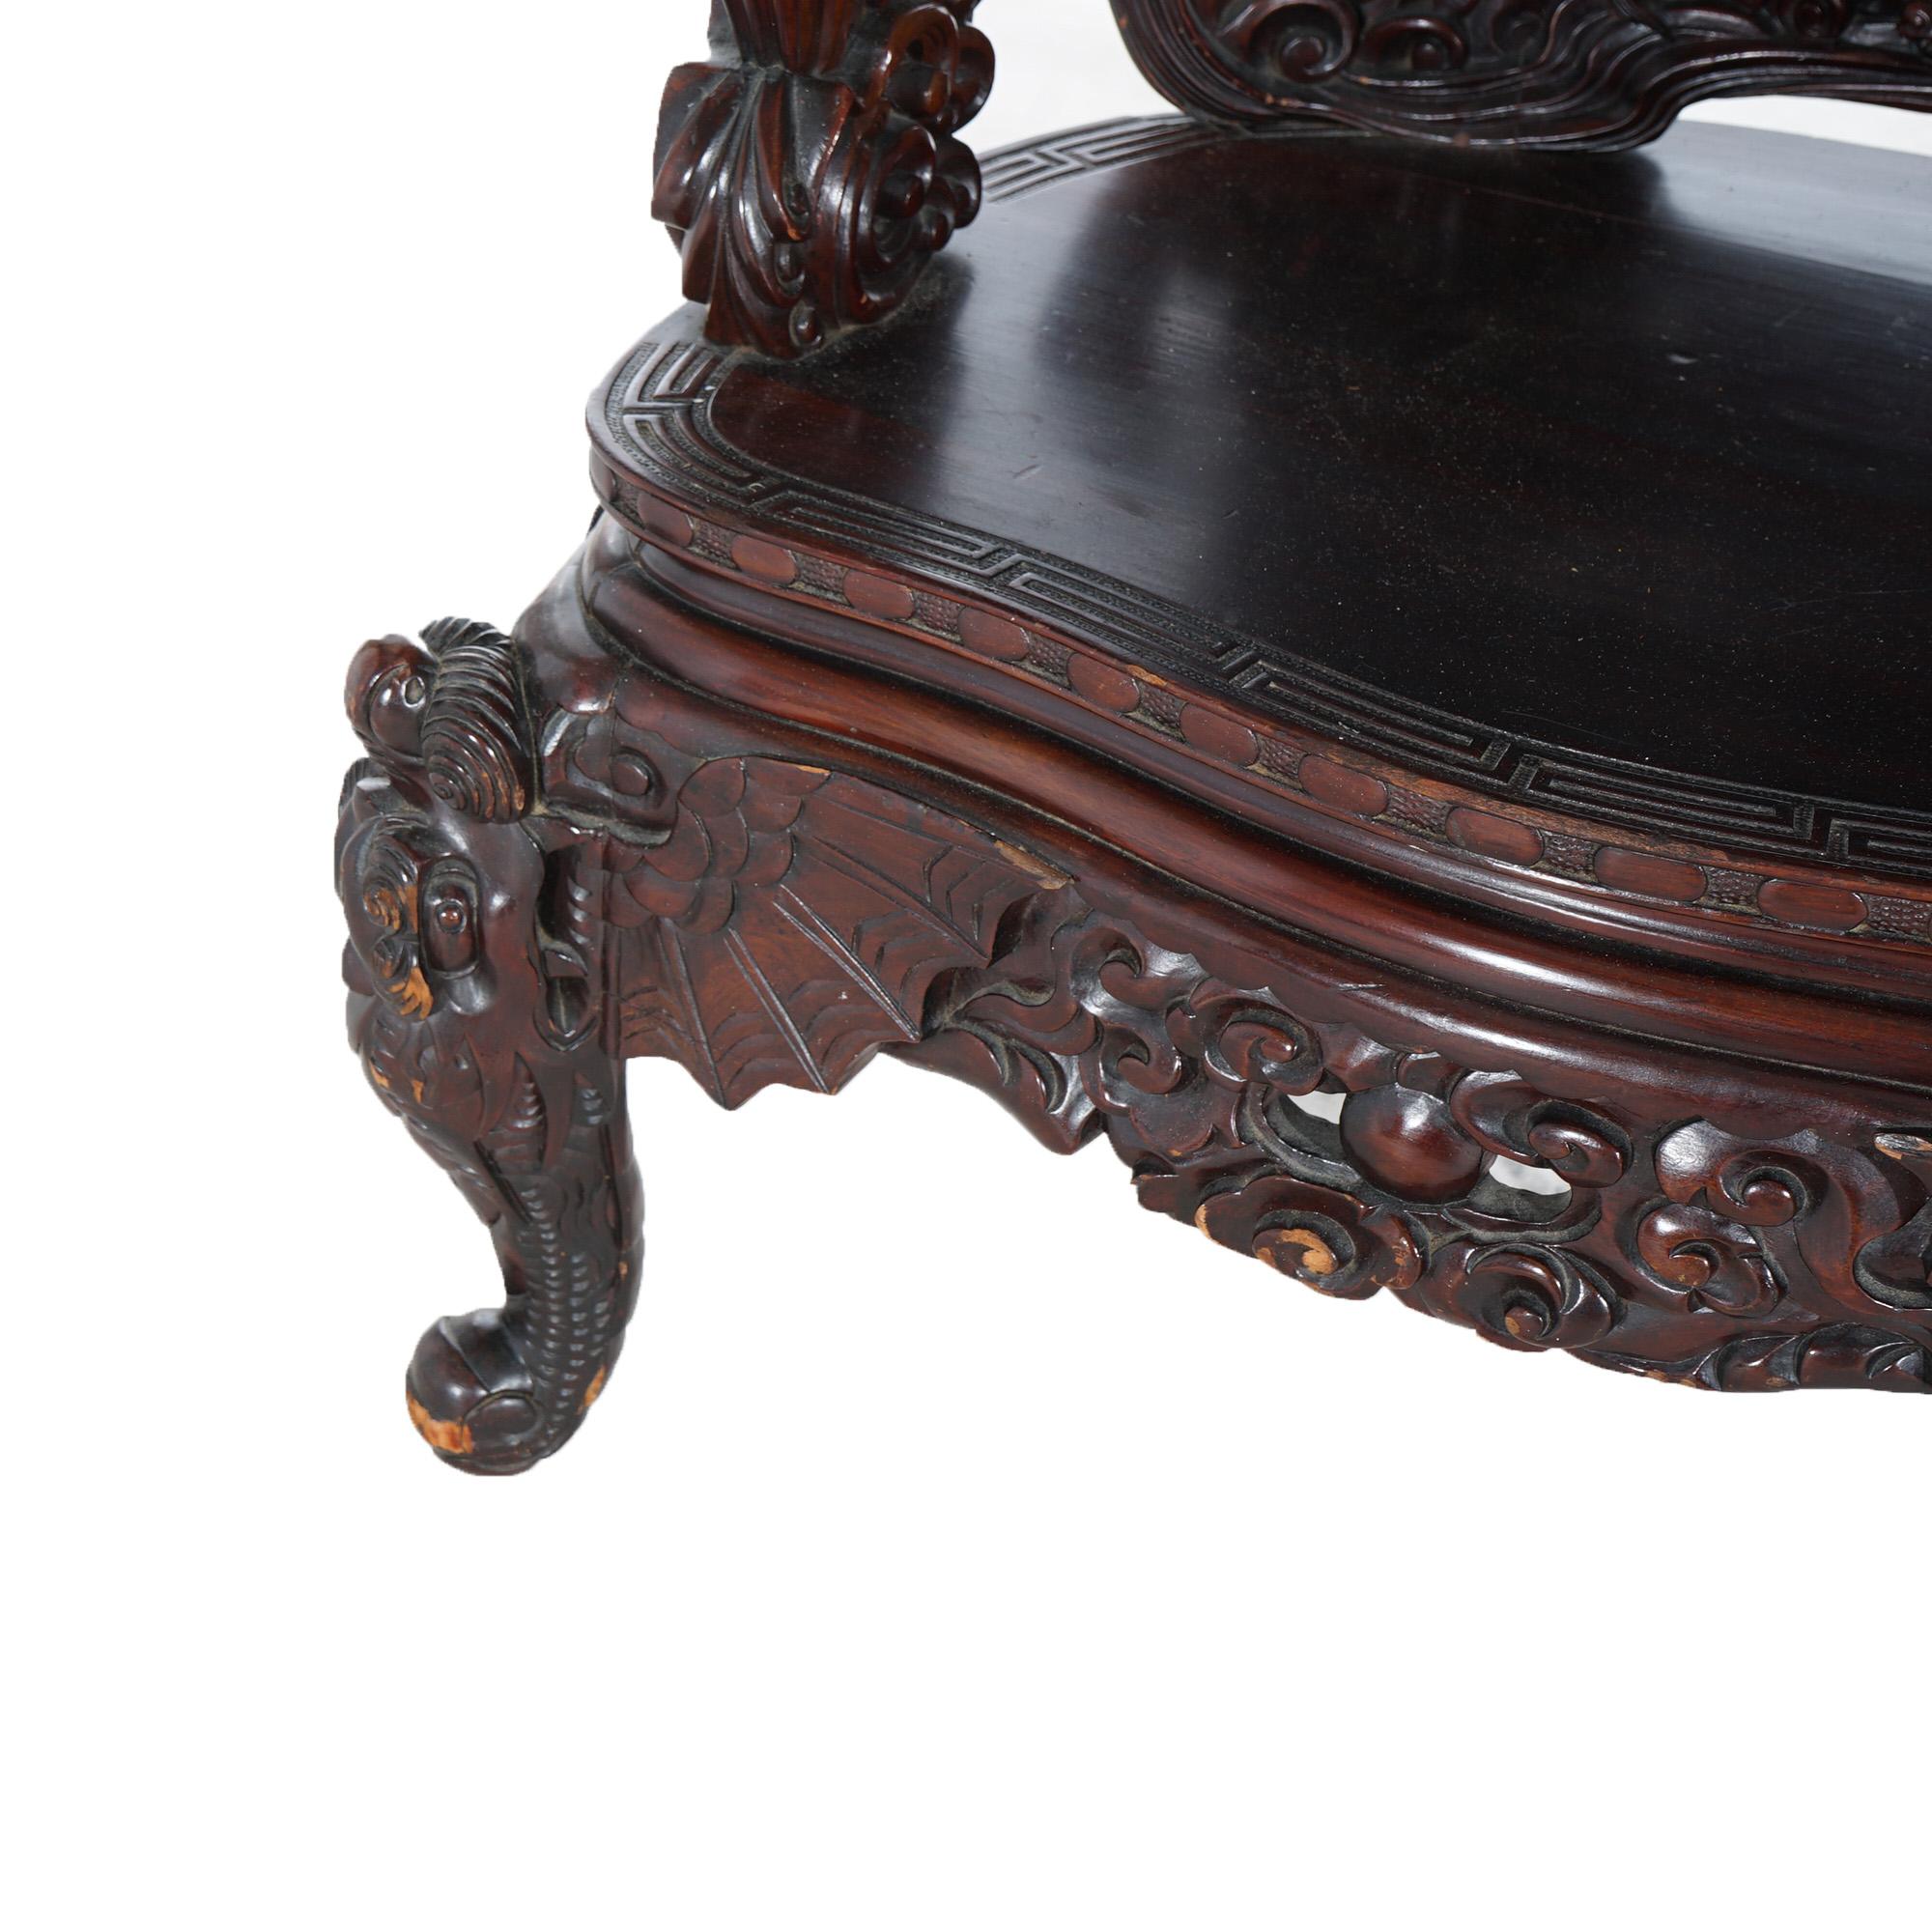 Antique Chinese Deeply Carved Rosewood Figural King Throne Chair with Dragons C1920

Measures - 48.25